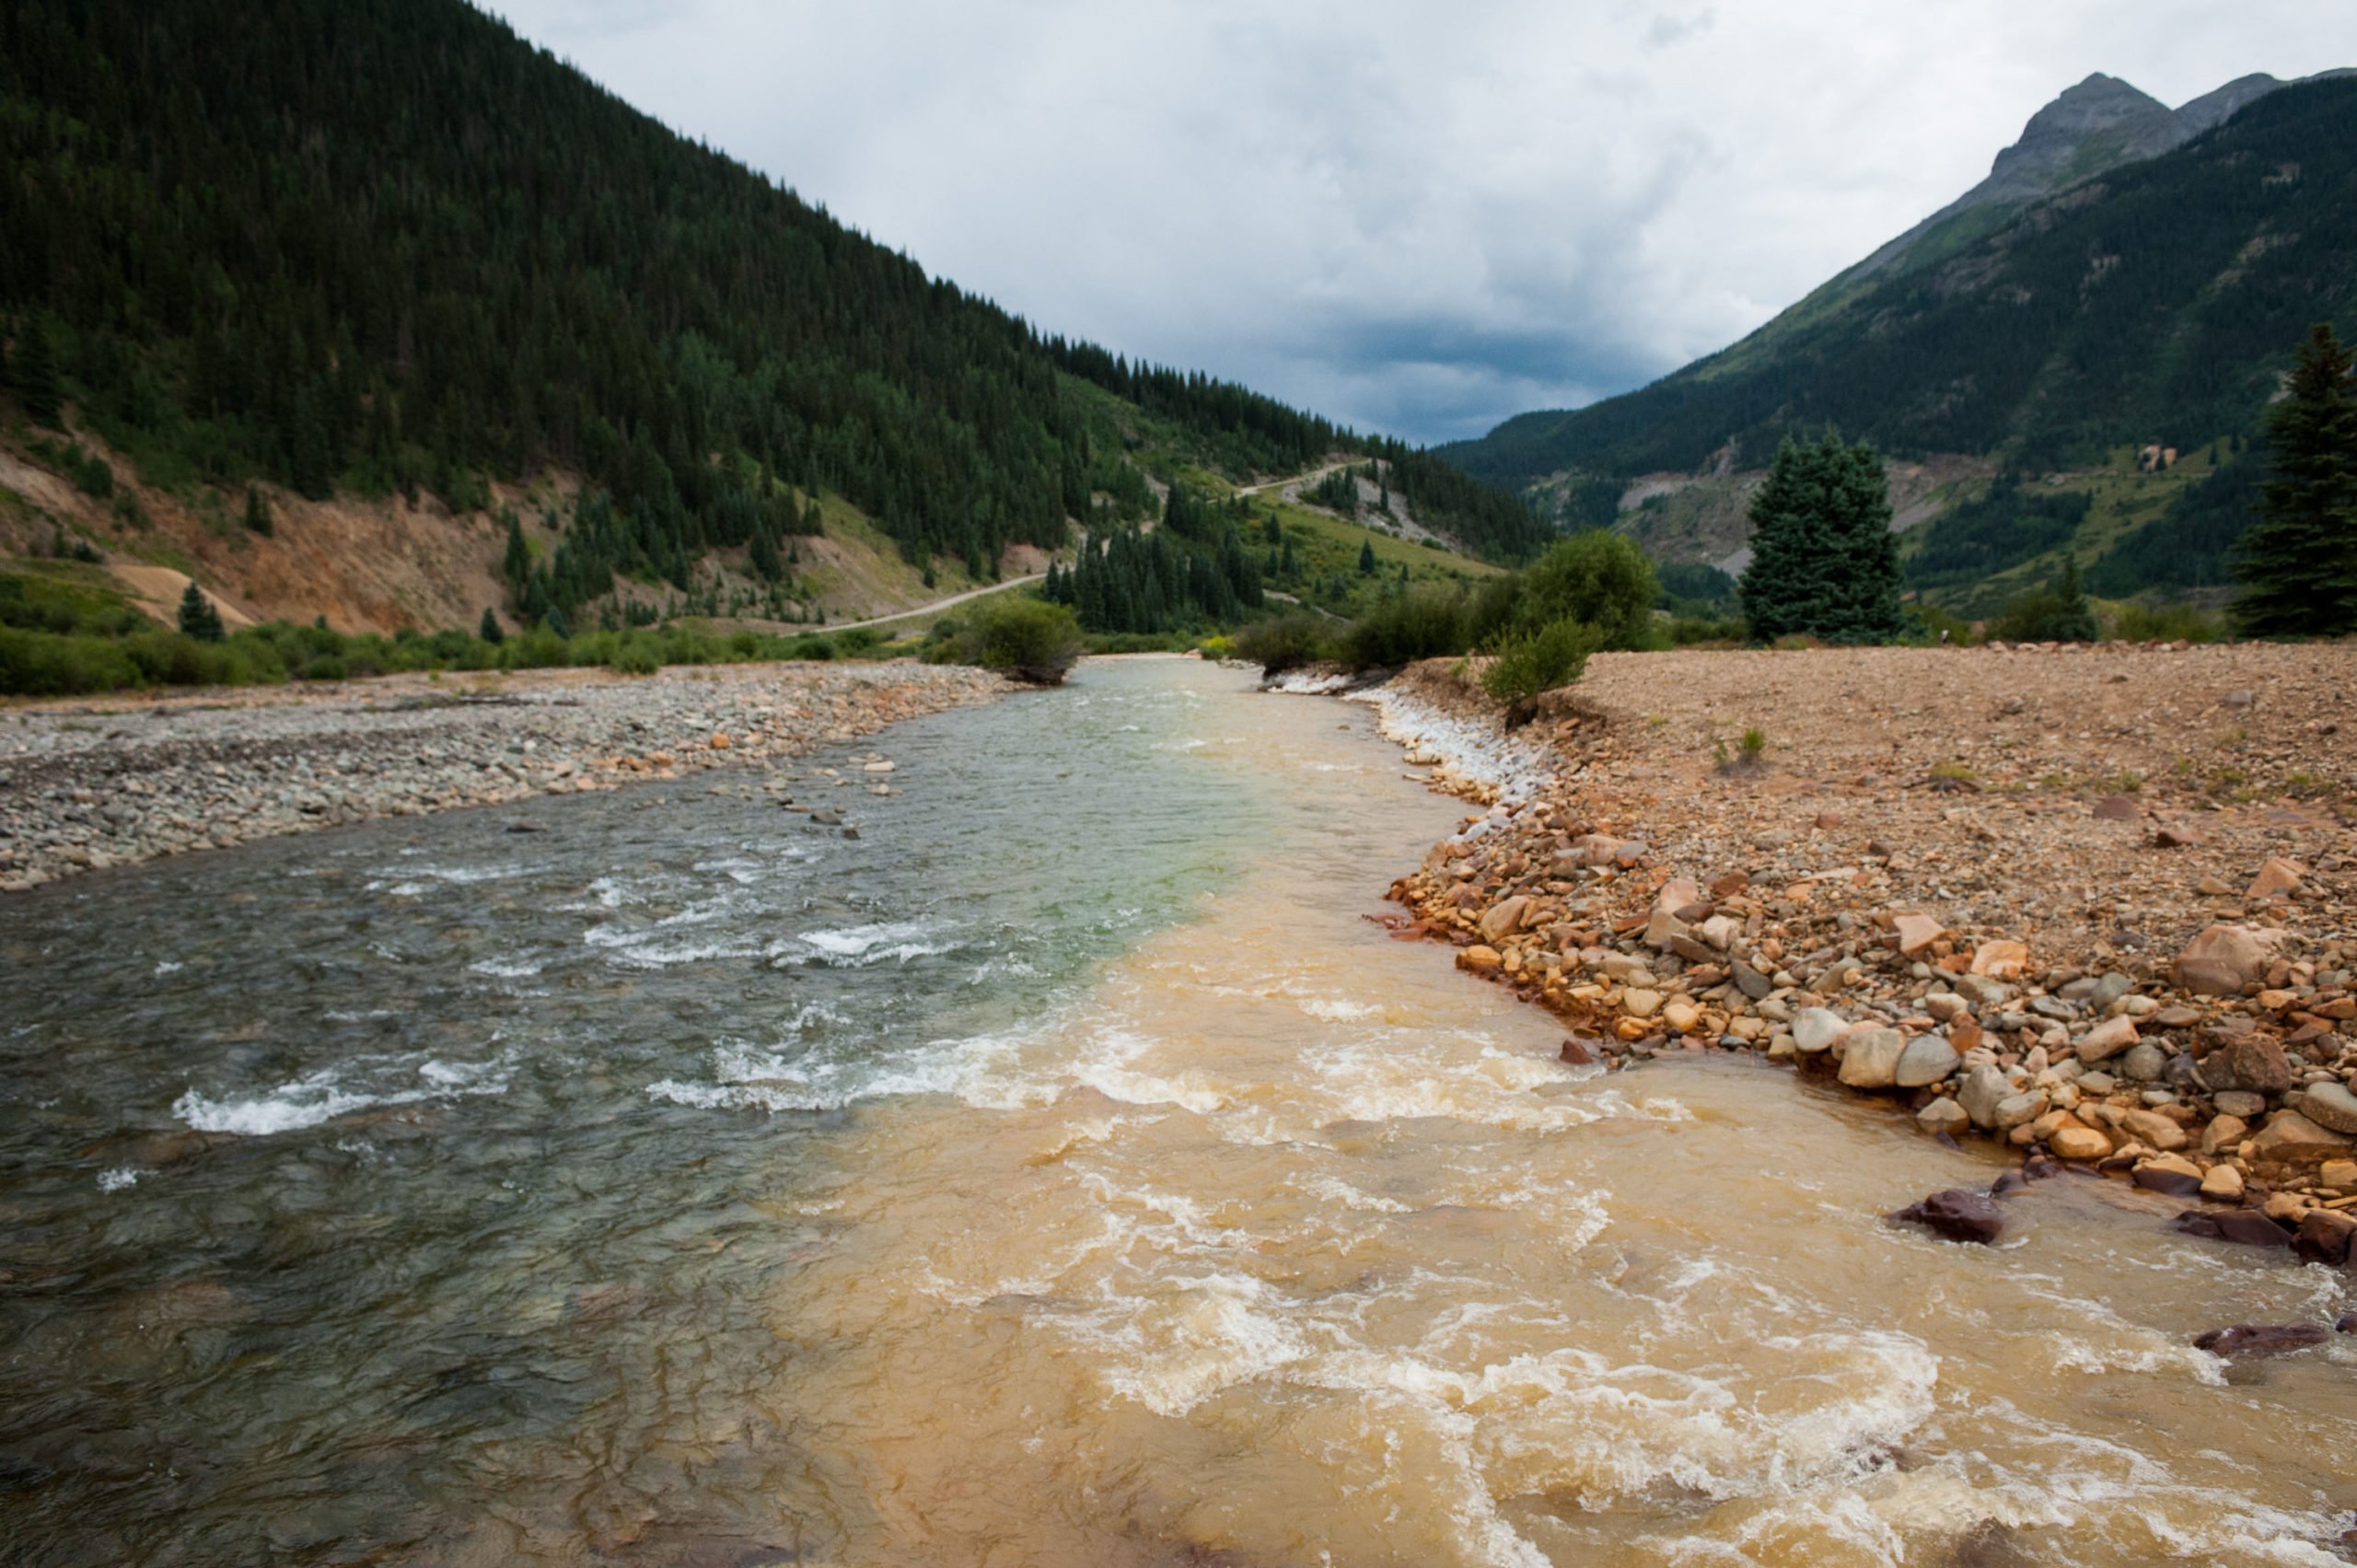 SILVERTON, CO - AUGUST 11: Cement Creek, which was flooded with millions of gallons of mining wastewater, meets with the Animas River on August 11, 2015 in Silverton, Colorado. The Environmental Protection Agency accidentally released approximately three million gallons of wastewater into the creek from the Gold King mine, polluting the larger Animas River downstream. (Photo by Theo Stroomer/Getty Images)